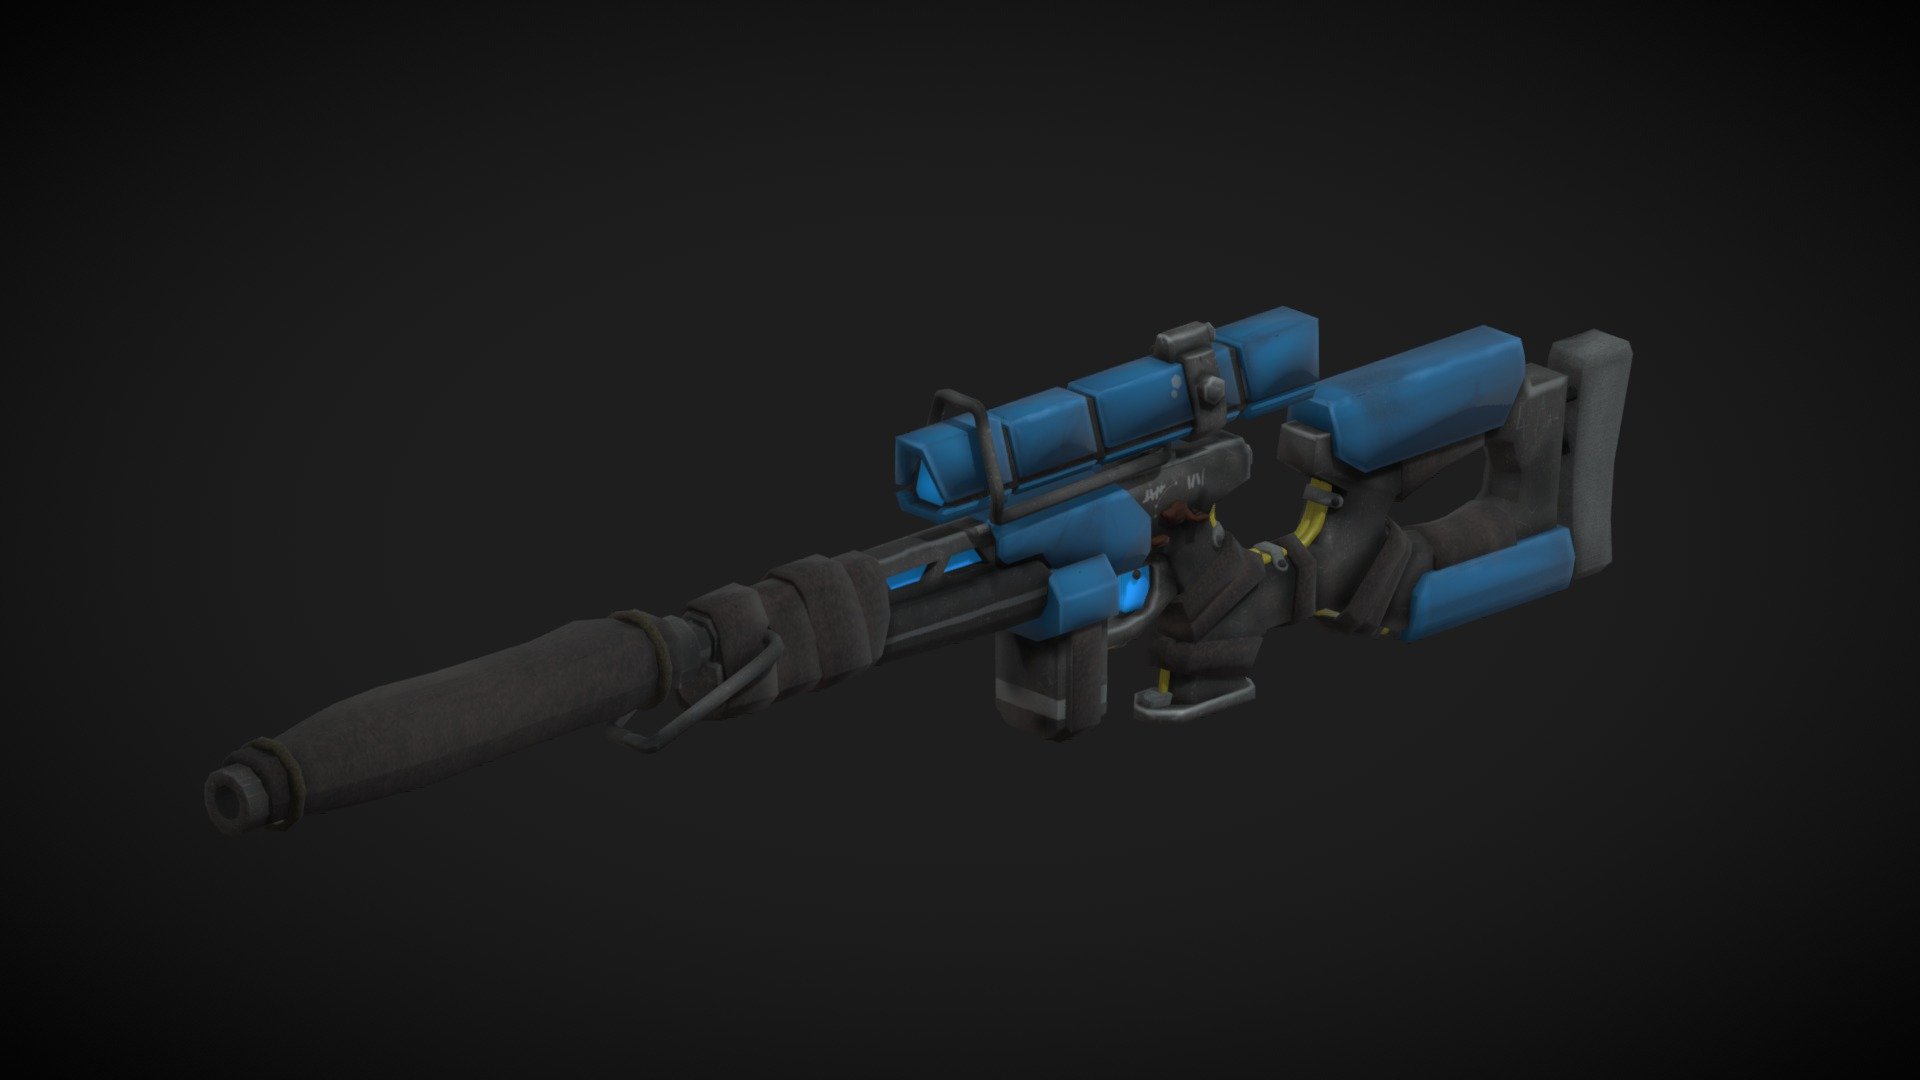 Sci-fi Sniper rifle TS-12

Ramshackle improvised hand-crafted sci-fi sniper rifle, low-poly and game-ready asset.

Files:




6 x 4096 x 4096 Textures.

FBXFile

OBJ File

STL File

Blend File
 - Sci-fi Sniper rifle TS-12 - Download Free 3D model by Tramicful 3d model